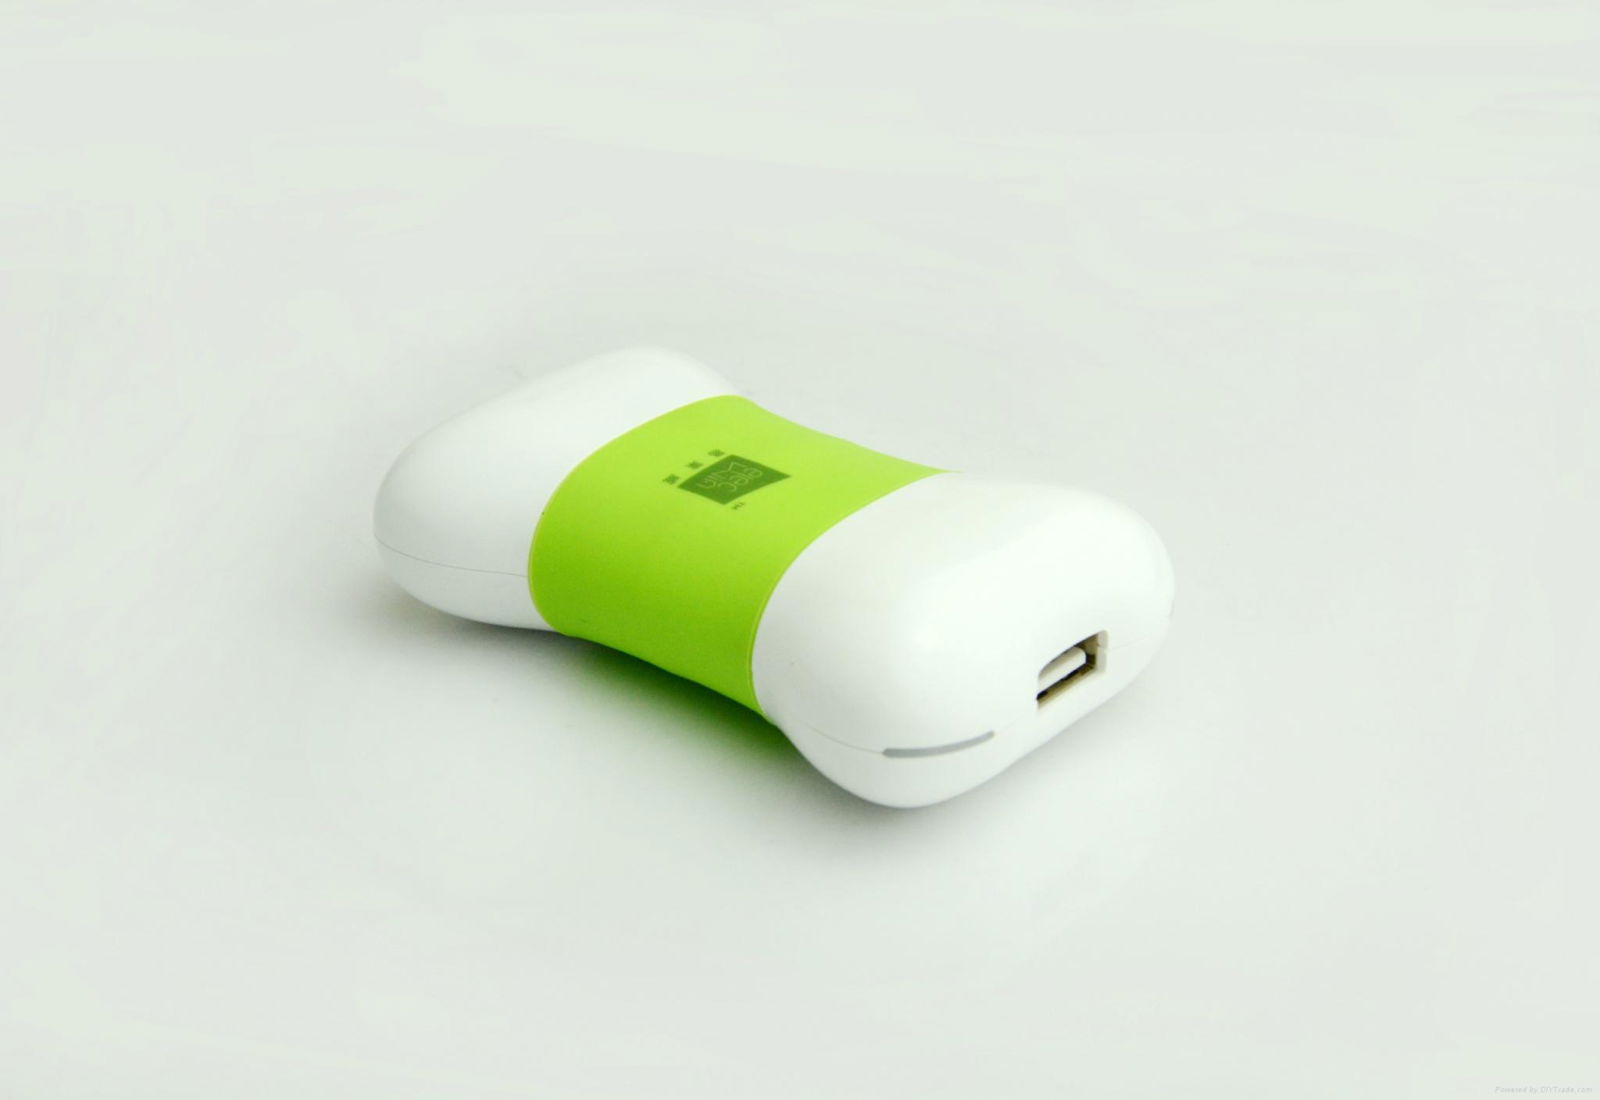 Hot Sell Back-up Battery Case Power Bank with 3000mAh Capacity 2